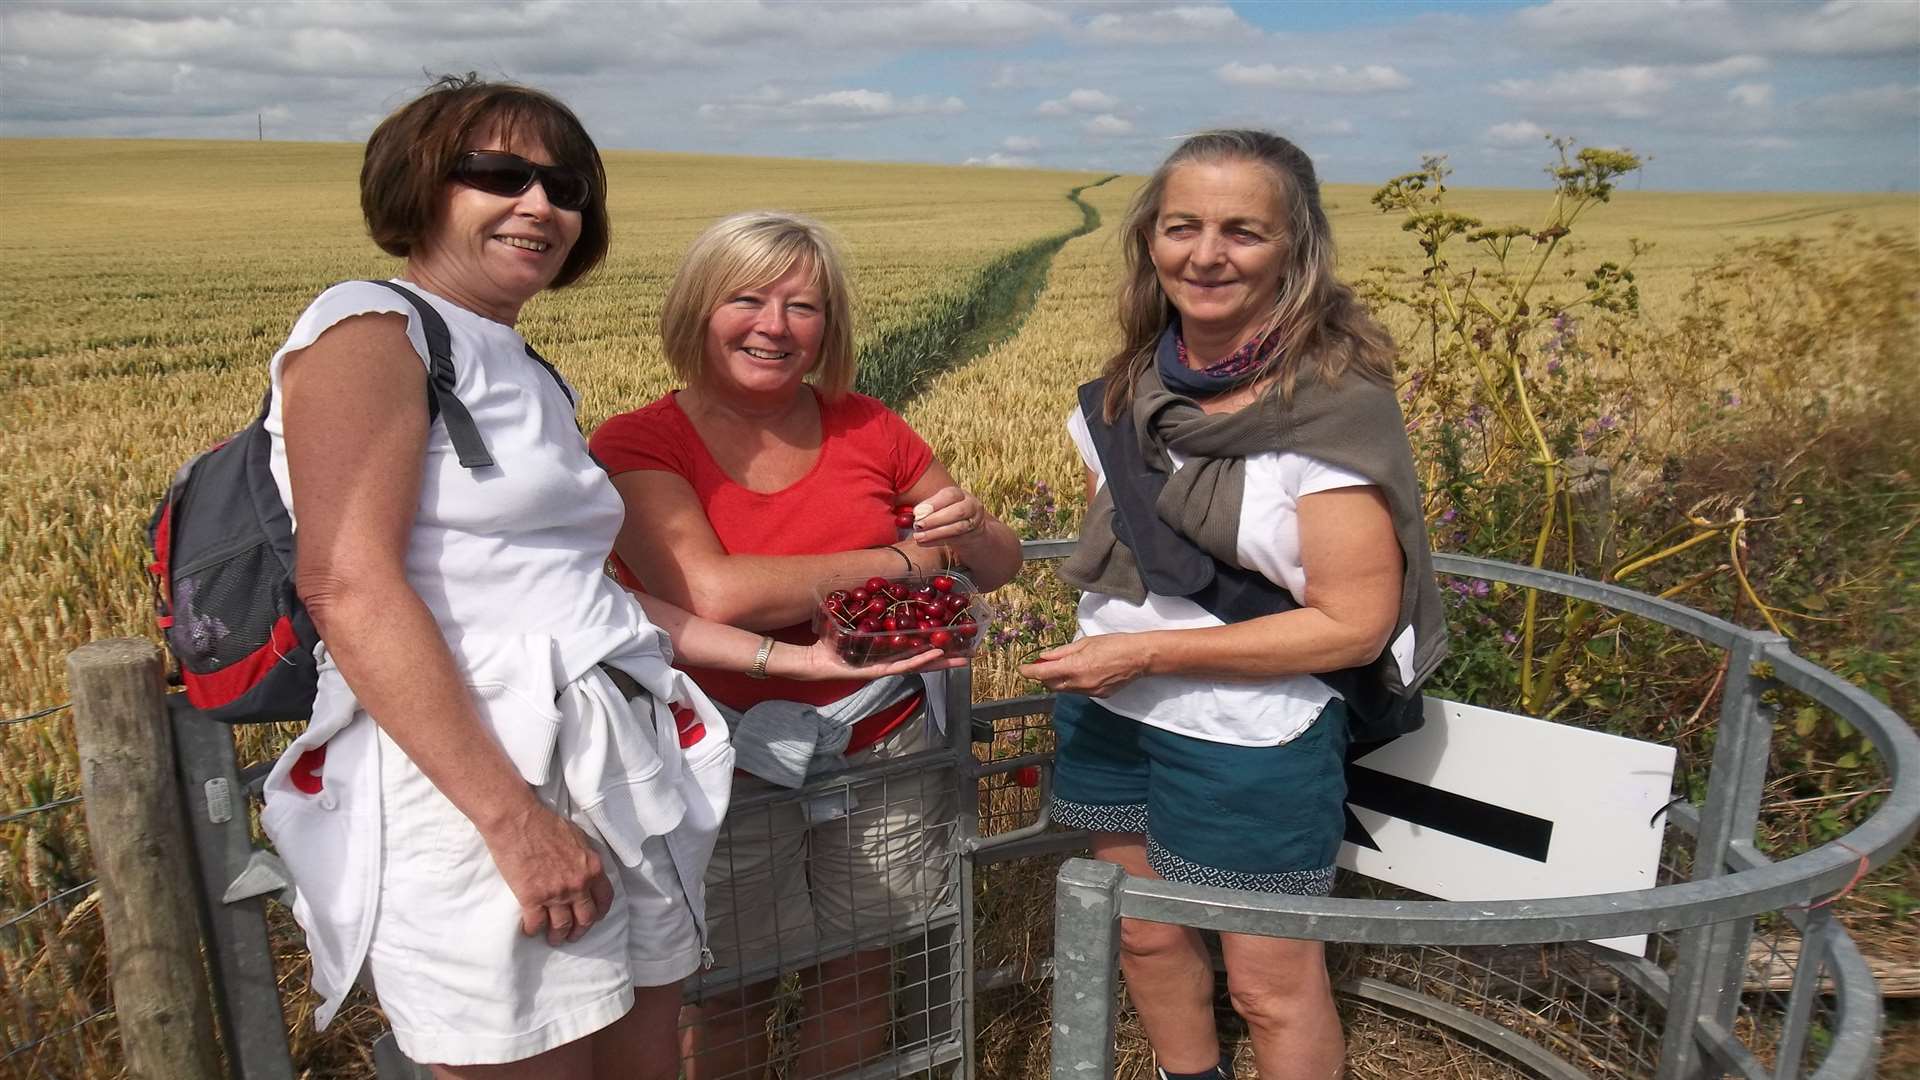 Janet Shields, Iris Digby and Linda Hoskins of Maidstone raise funds for Heart of Kent Hospice at the KM Charity Walk 2014